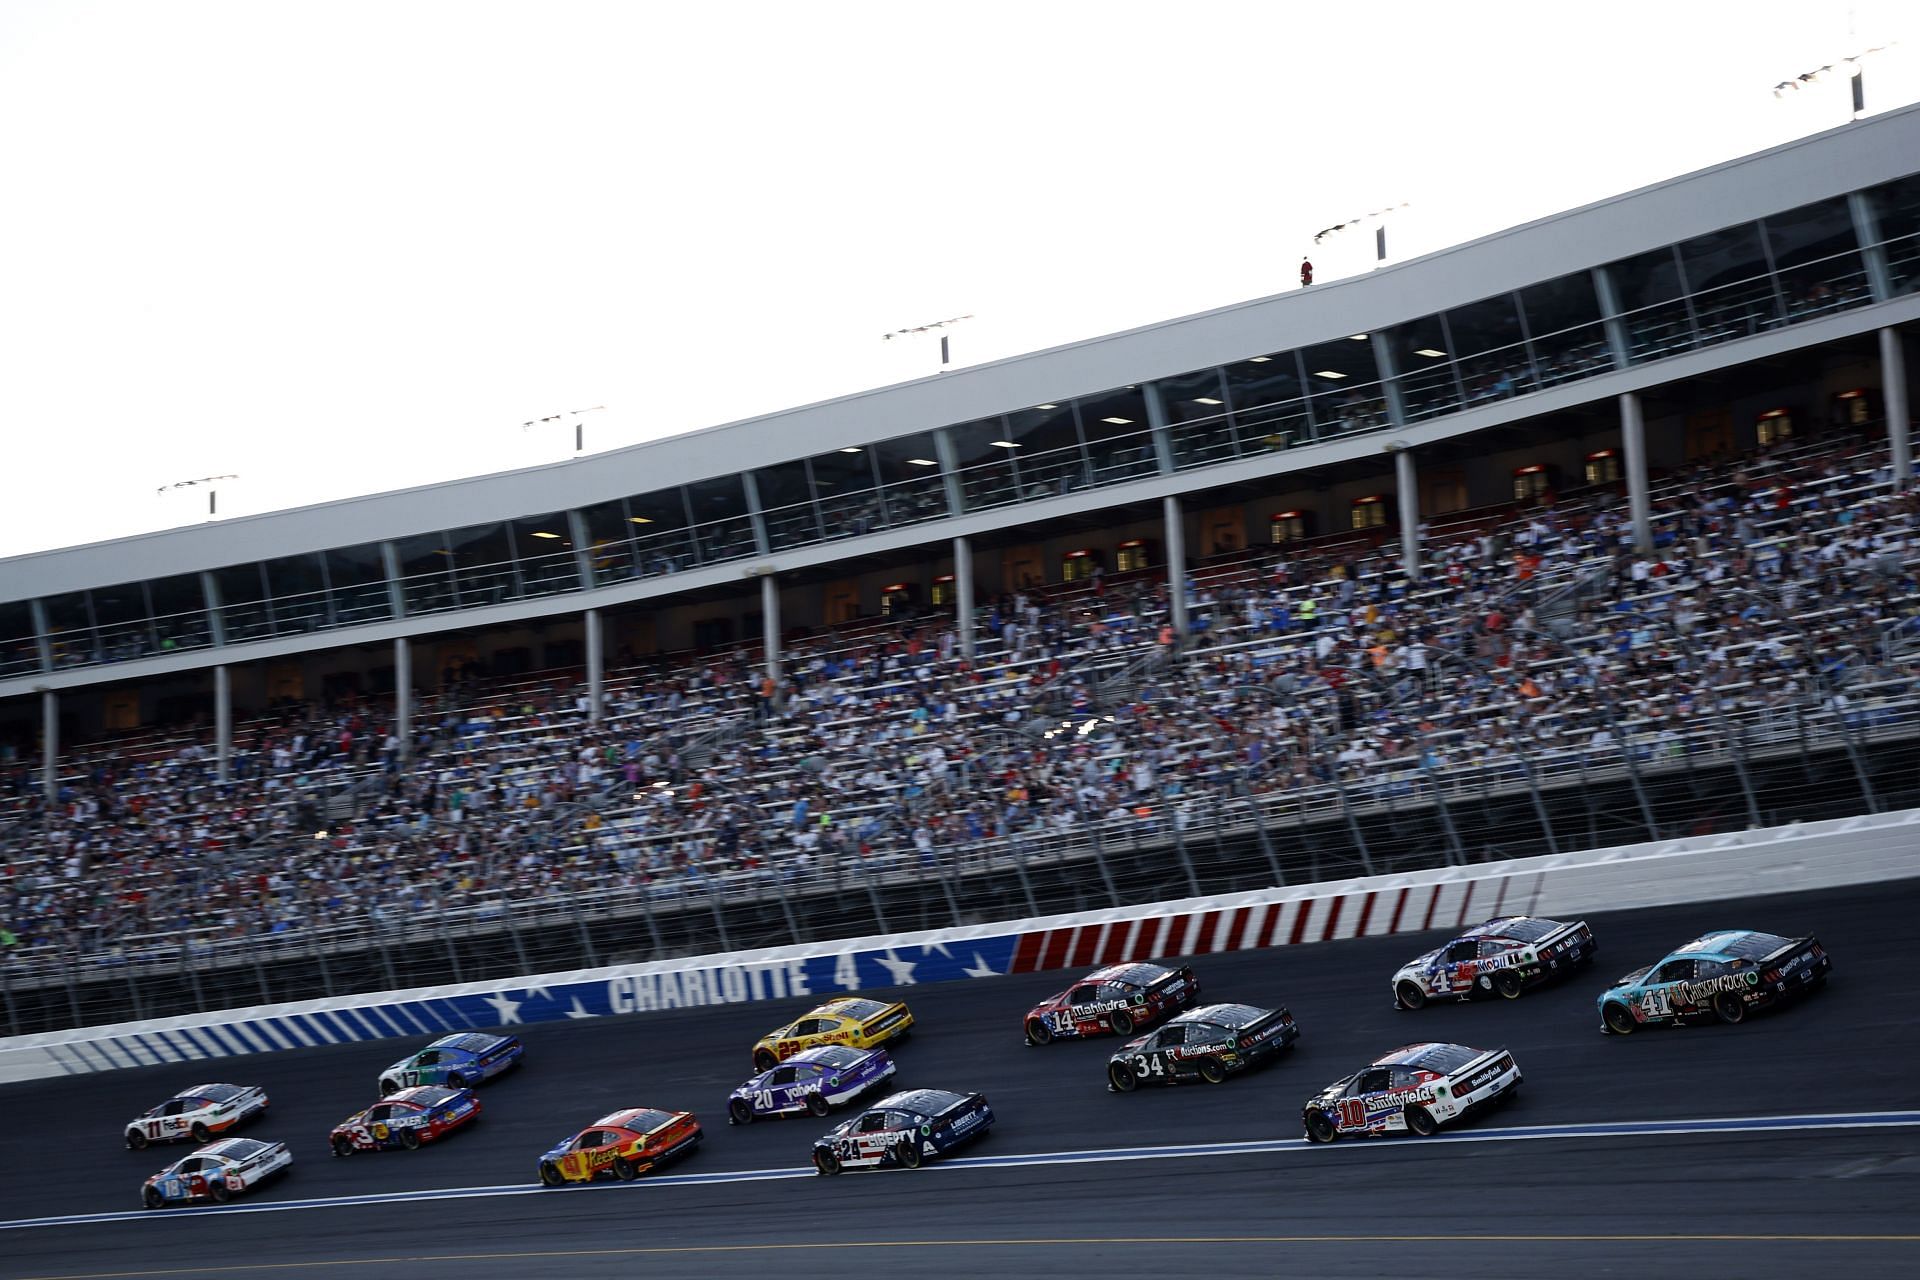 A general view of racing during the NASCAR Cup Series Coca-Cola 600 at Charlotte Motor Speedway (Photo by Jared C. Tilton/Getty Images)